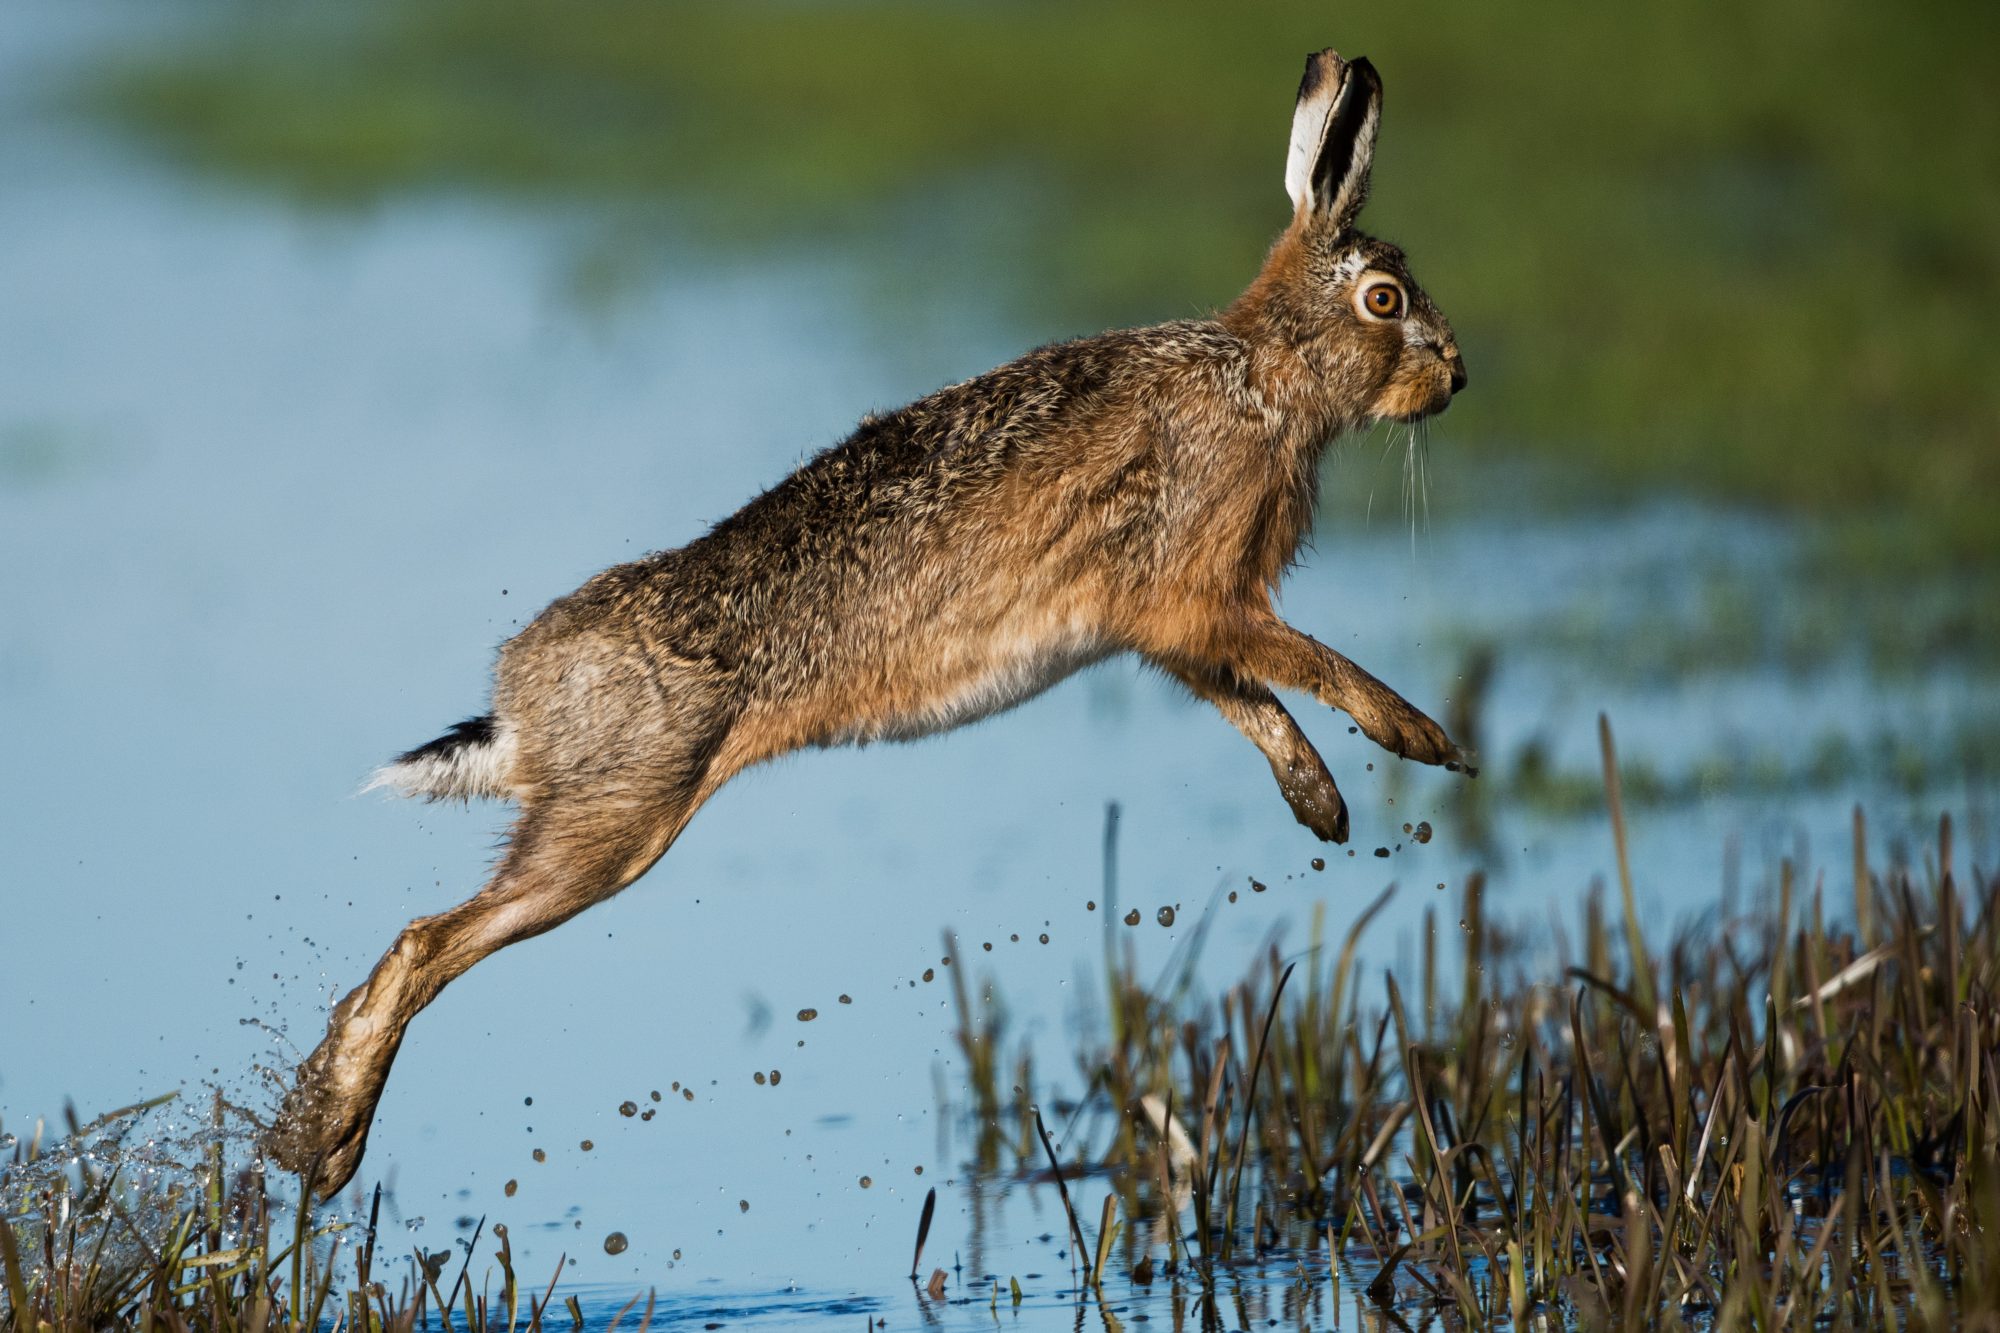 “To ride as a hare”, local sayings from around the world